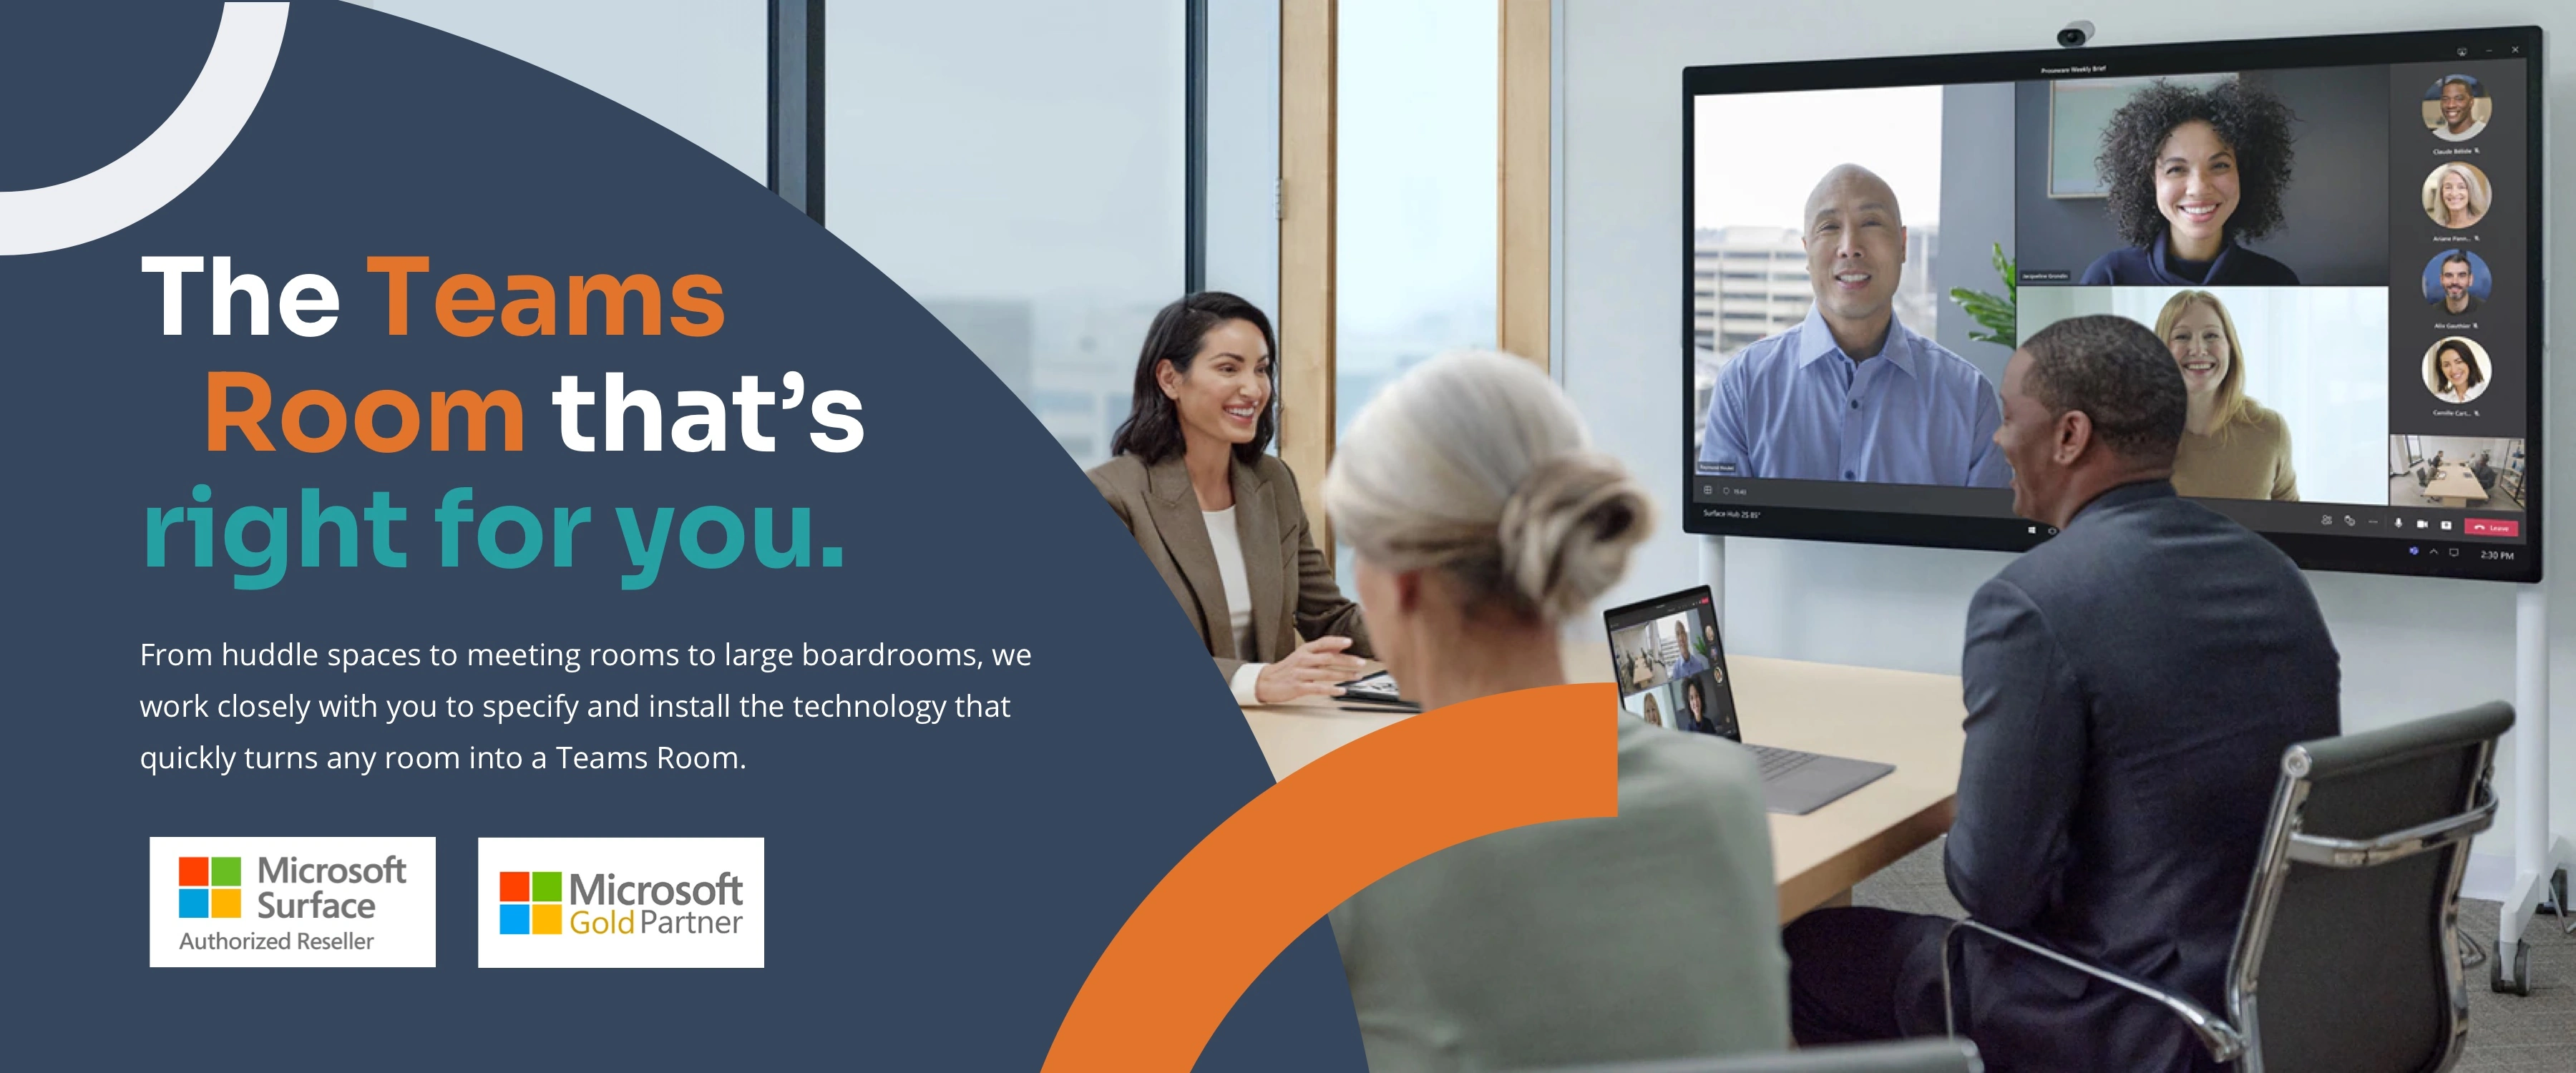 The Teams Room that's right for you. From huddle spaces to meeting rooms to large boardrooms, we work closely with you to specify and isntall the technology that quickly turns any room into a Teams Room